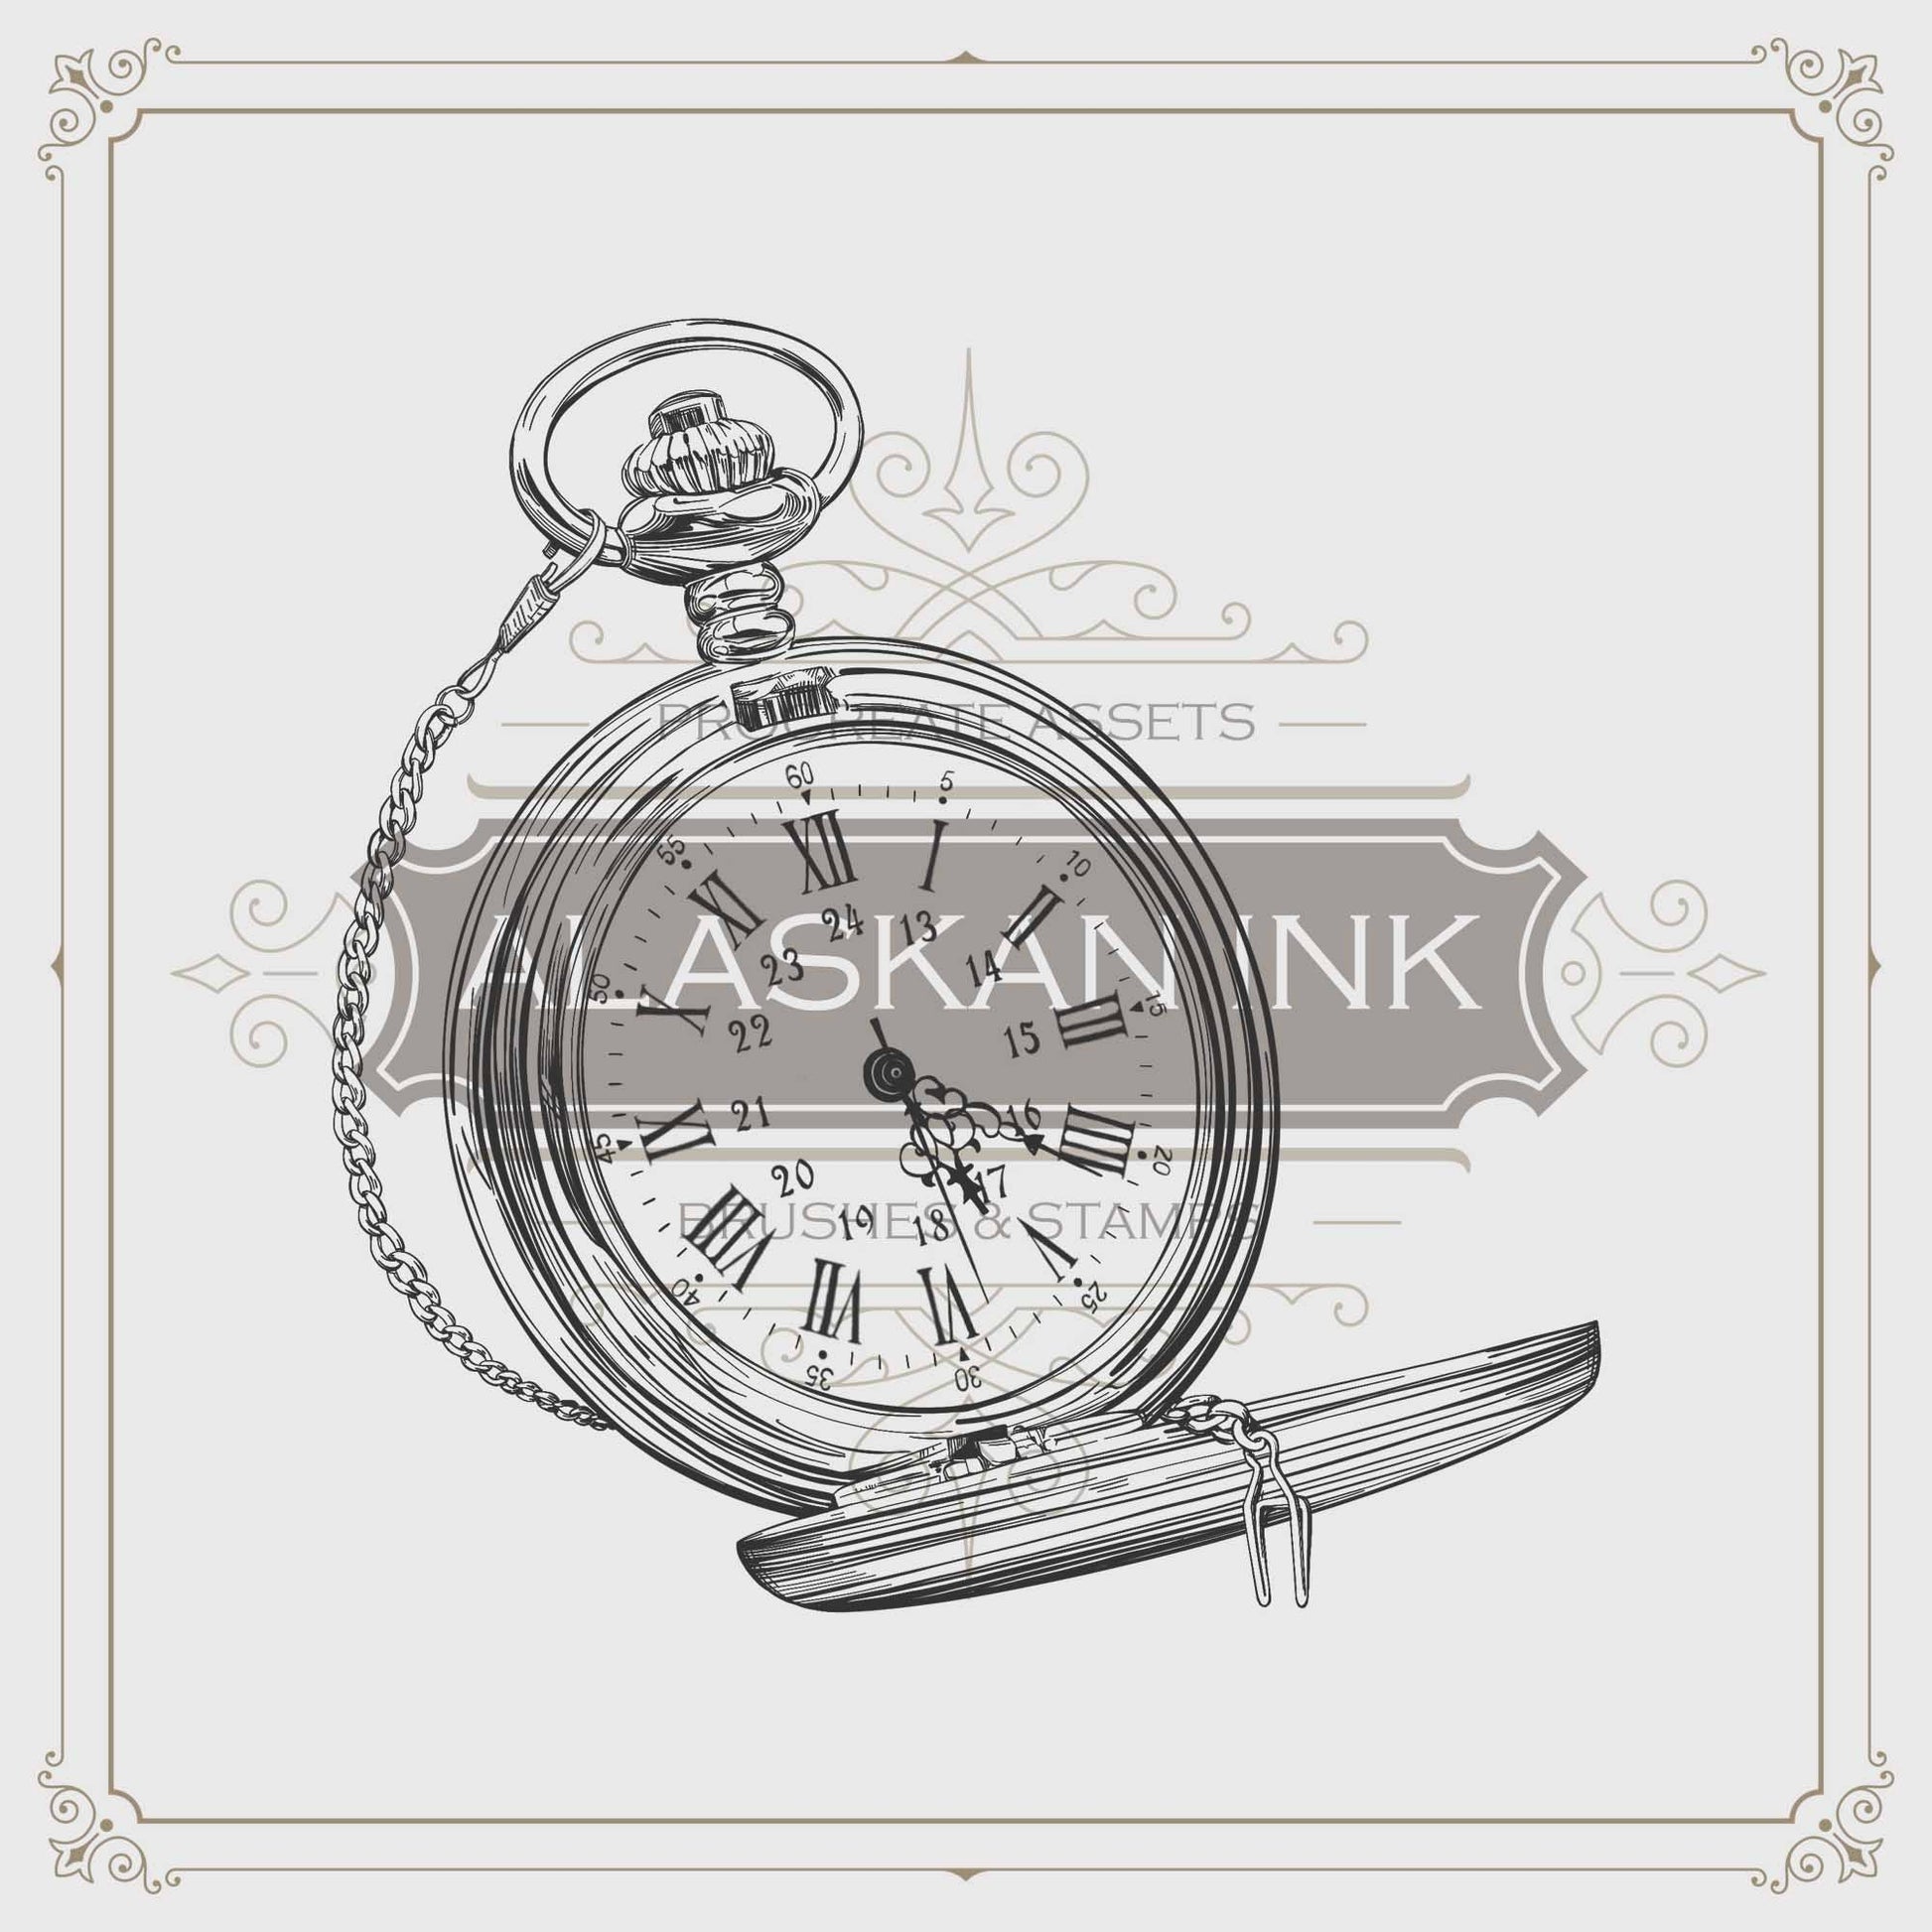 50 Pocket Watch Tattoo Brushes for Procreate application iPad and iPAd pro created by Tattoo Artists 